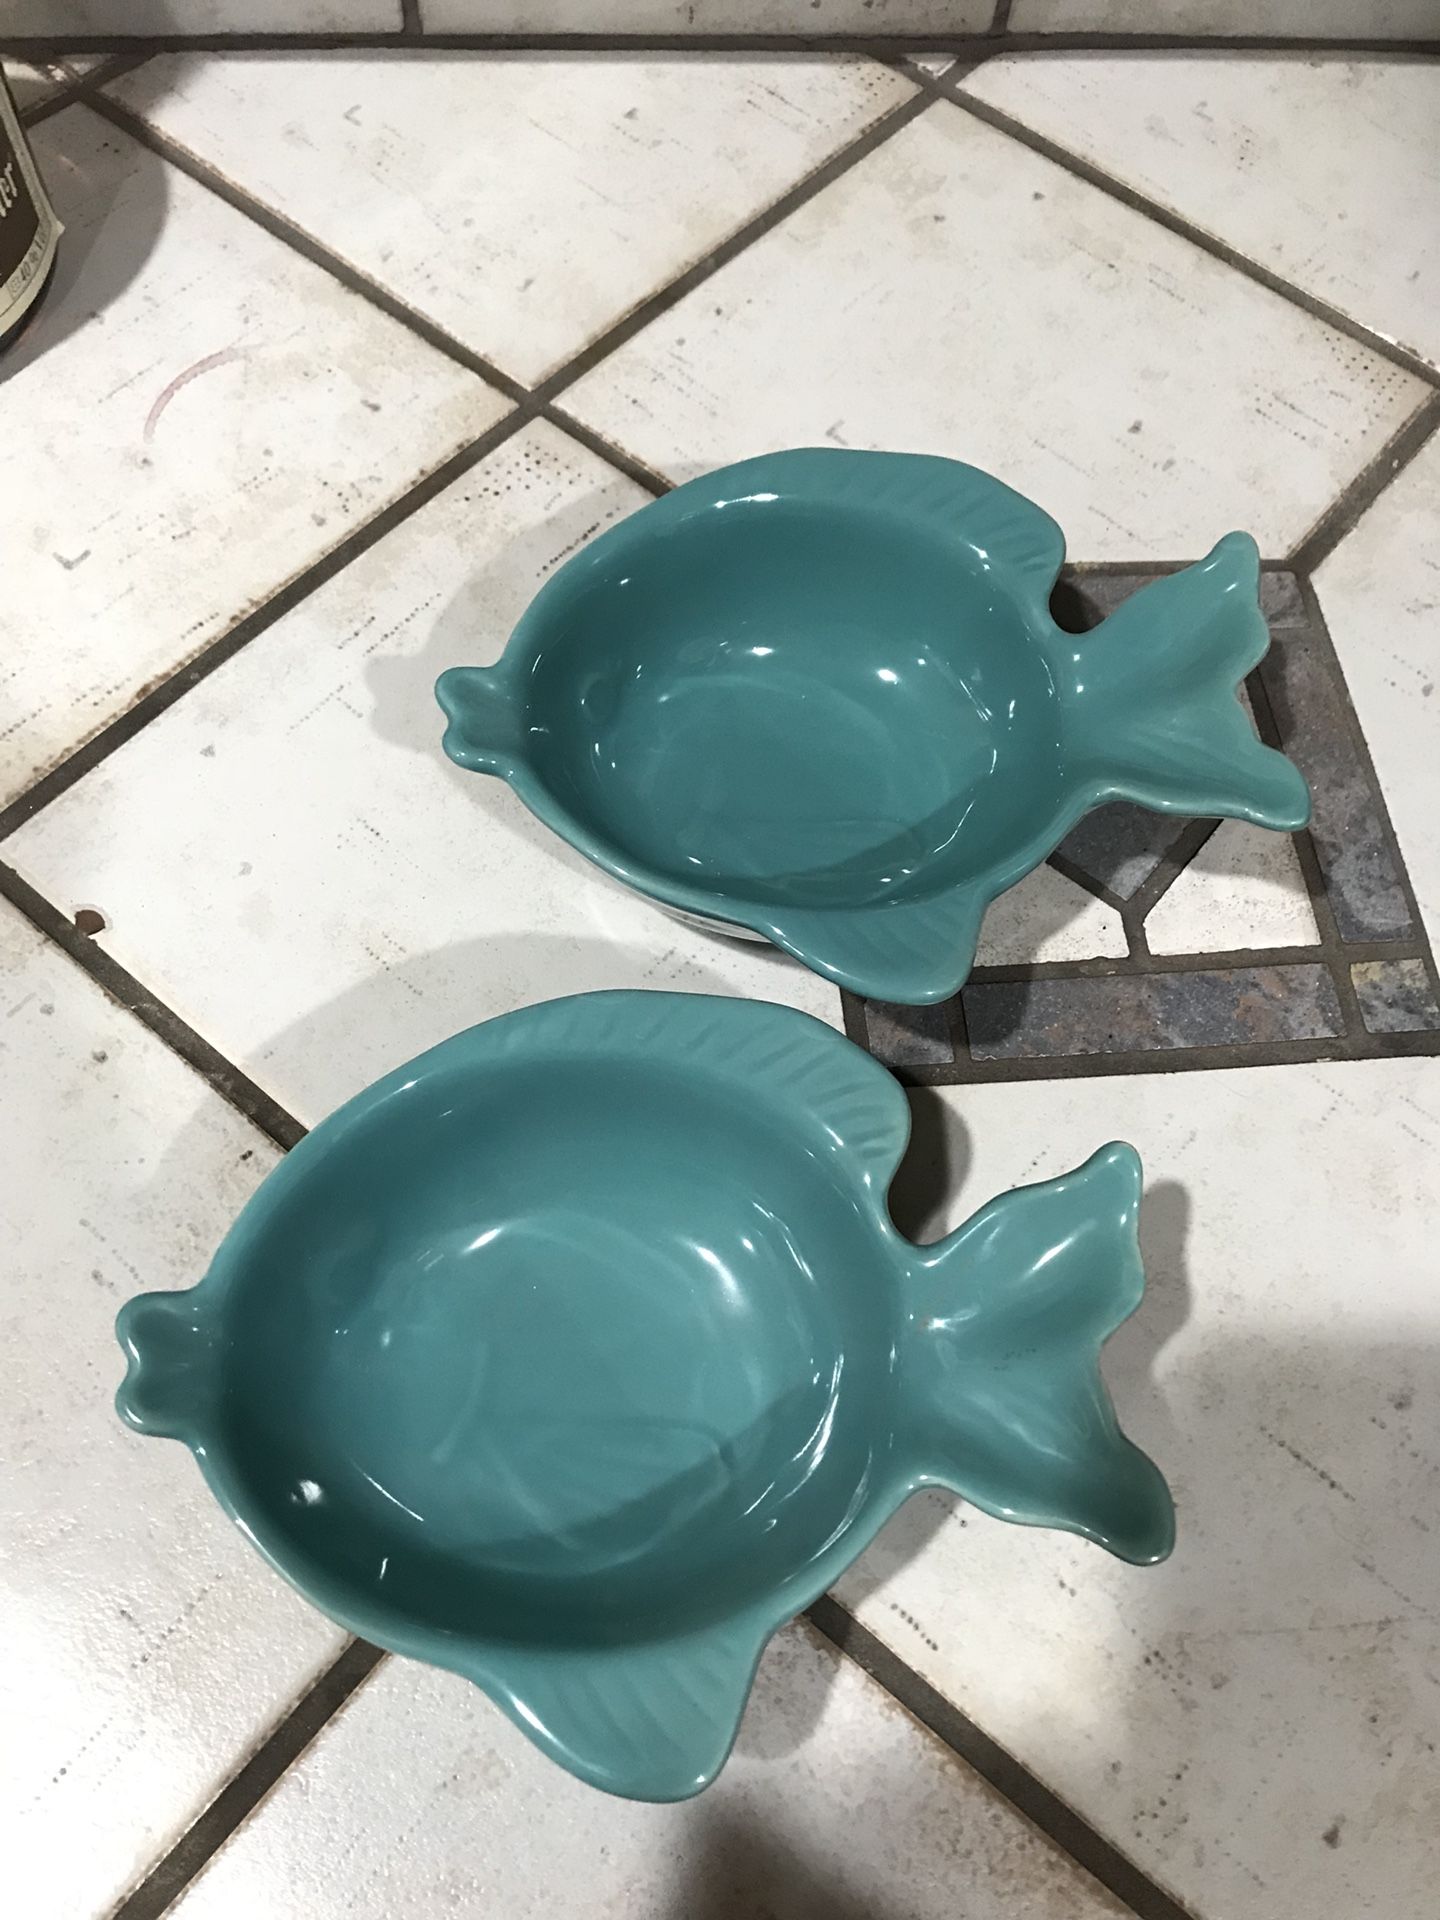 Candy dish or for goldfish for party baby shower